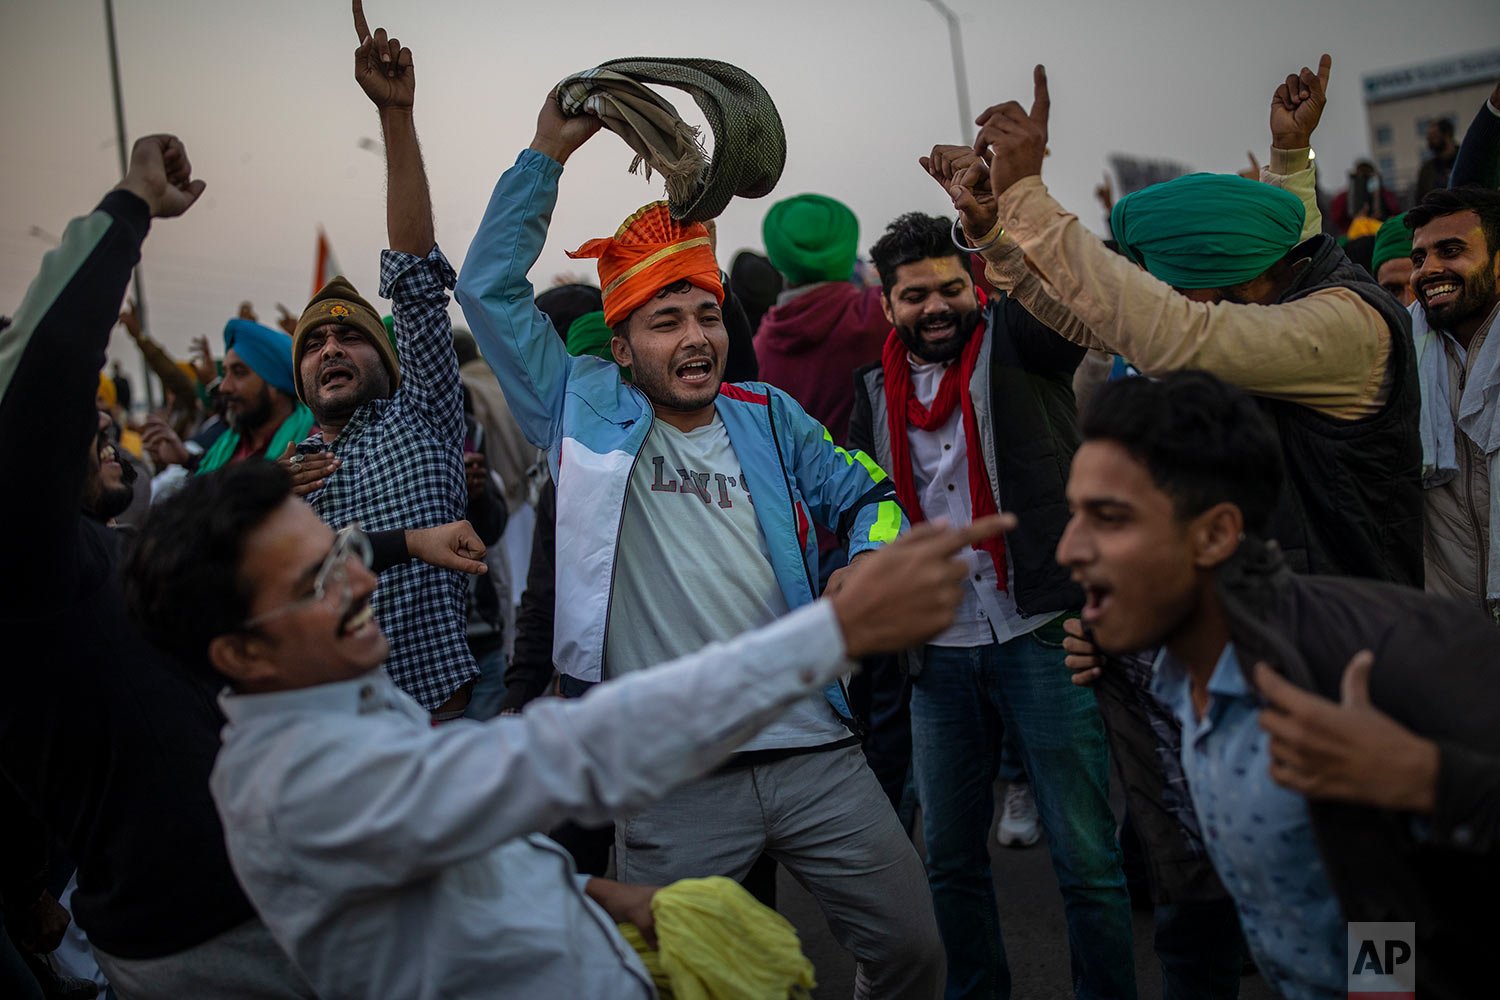  A group of Indian farmers dance at a protest site as they start to dismantle temporary structures used during protests in Ghazipur, on the outskirts of New Delhi, India, Friday, Dec. 10, 2021.  (AP Photo/Altaf Qadri) 